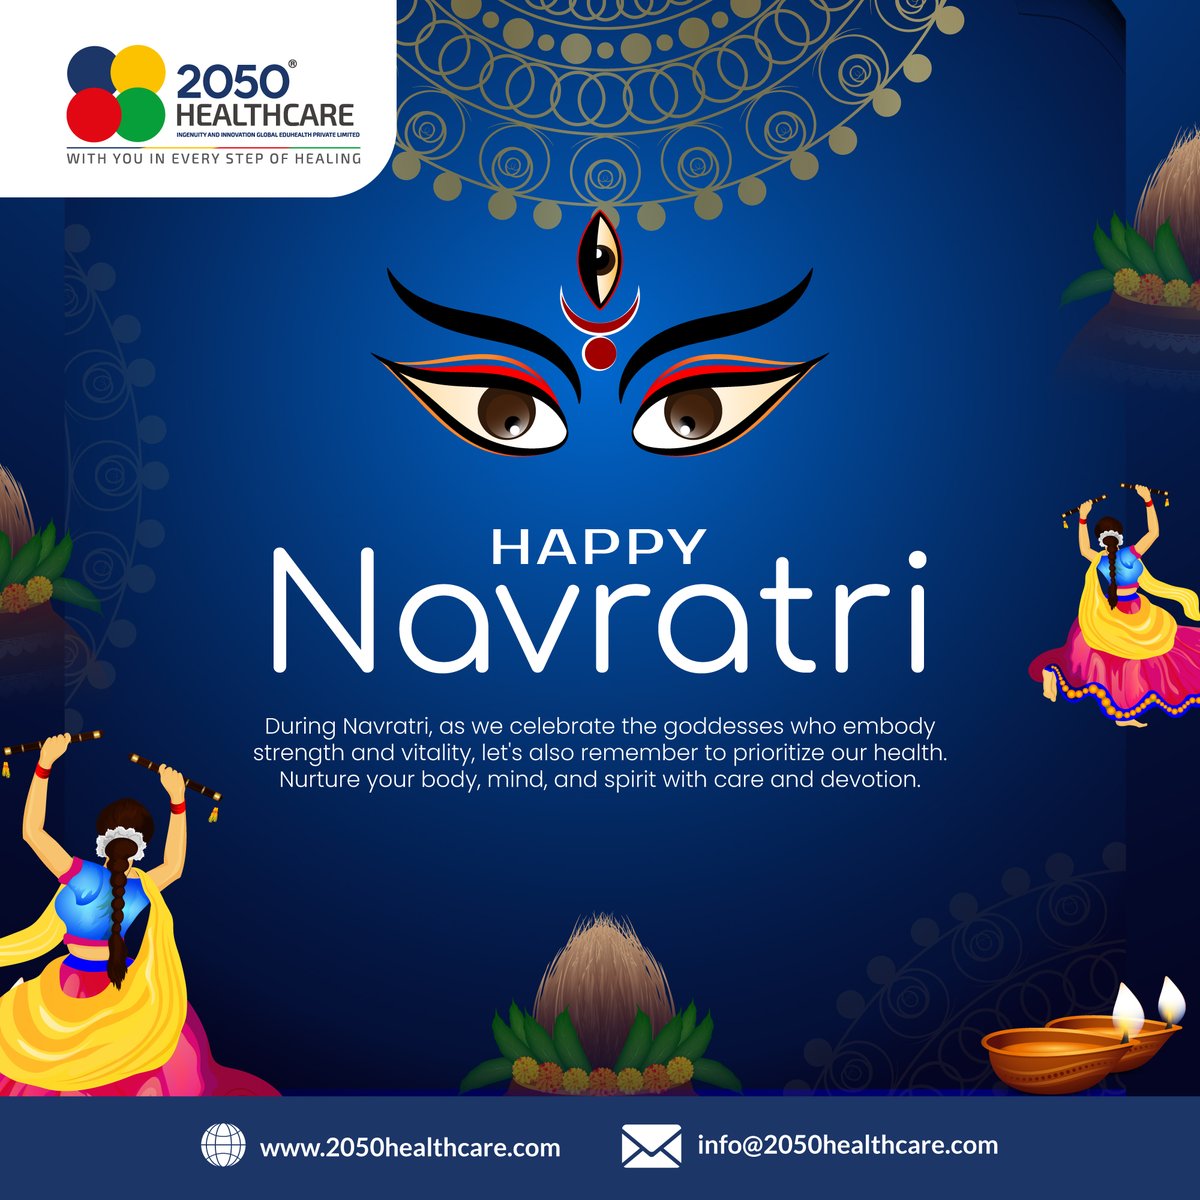 Elevate your health to new heights this Navaratri! 2050 Healthcare wishes you a festival filled with energy, positivity, and well-being. Let the spirit of Navaratri inspire a journey to your best self. ✨

#Navaratri #2050Healthcare #WithYouInEveryStepOfHealing